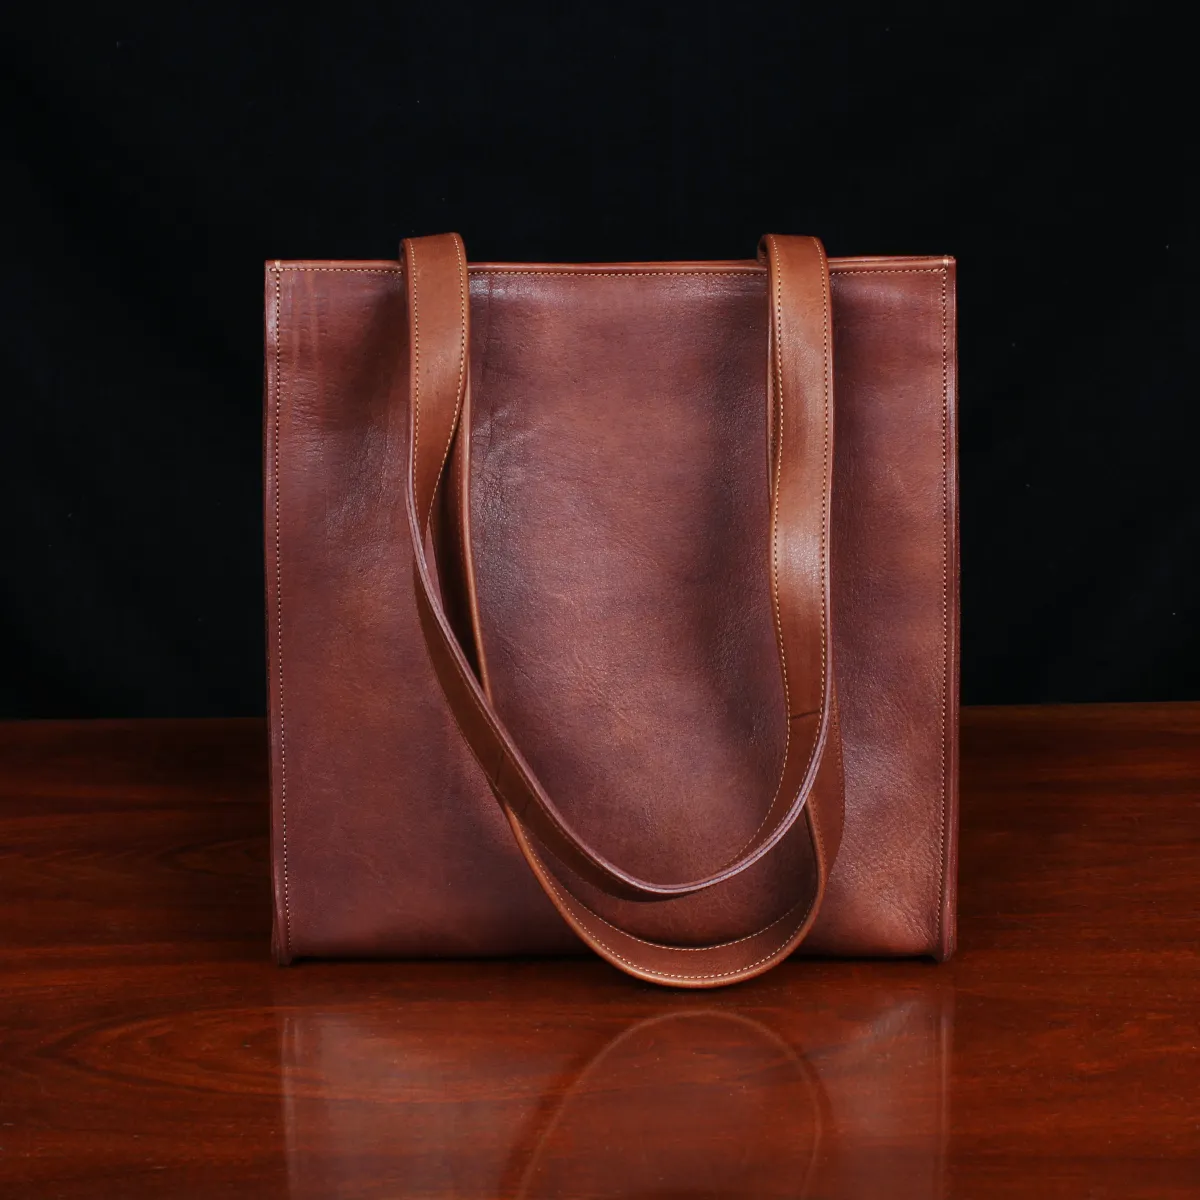 No. 9b Leather Tote in Vintage Brown